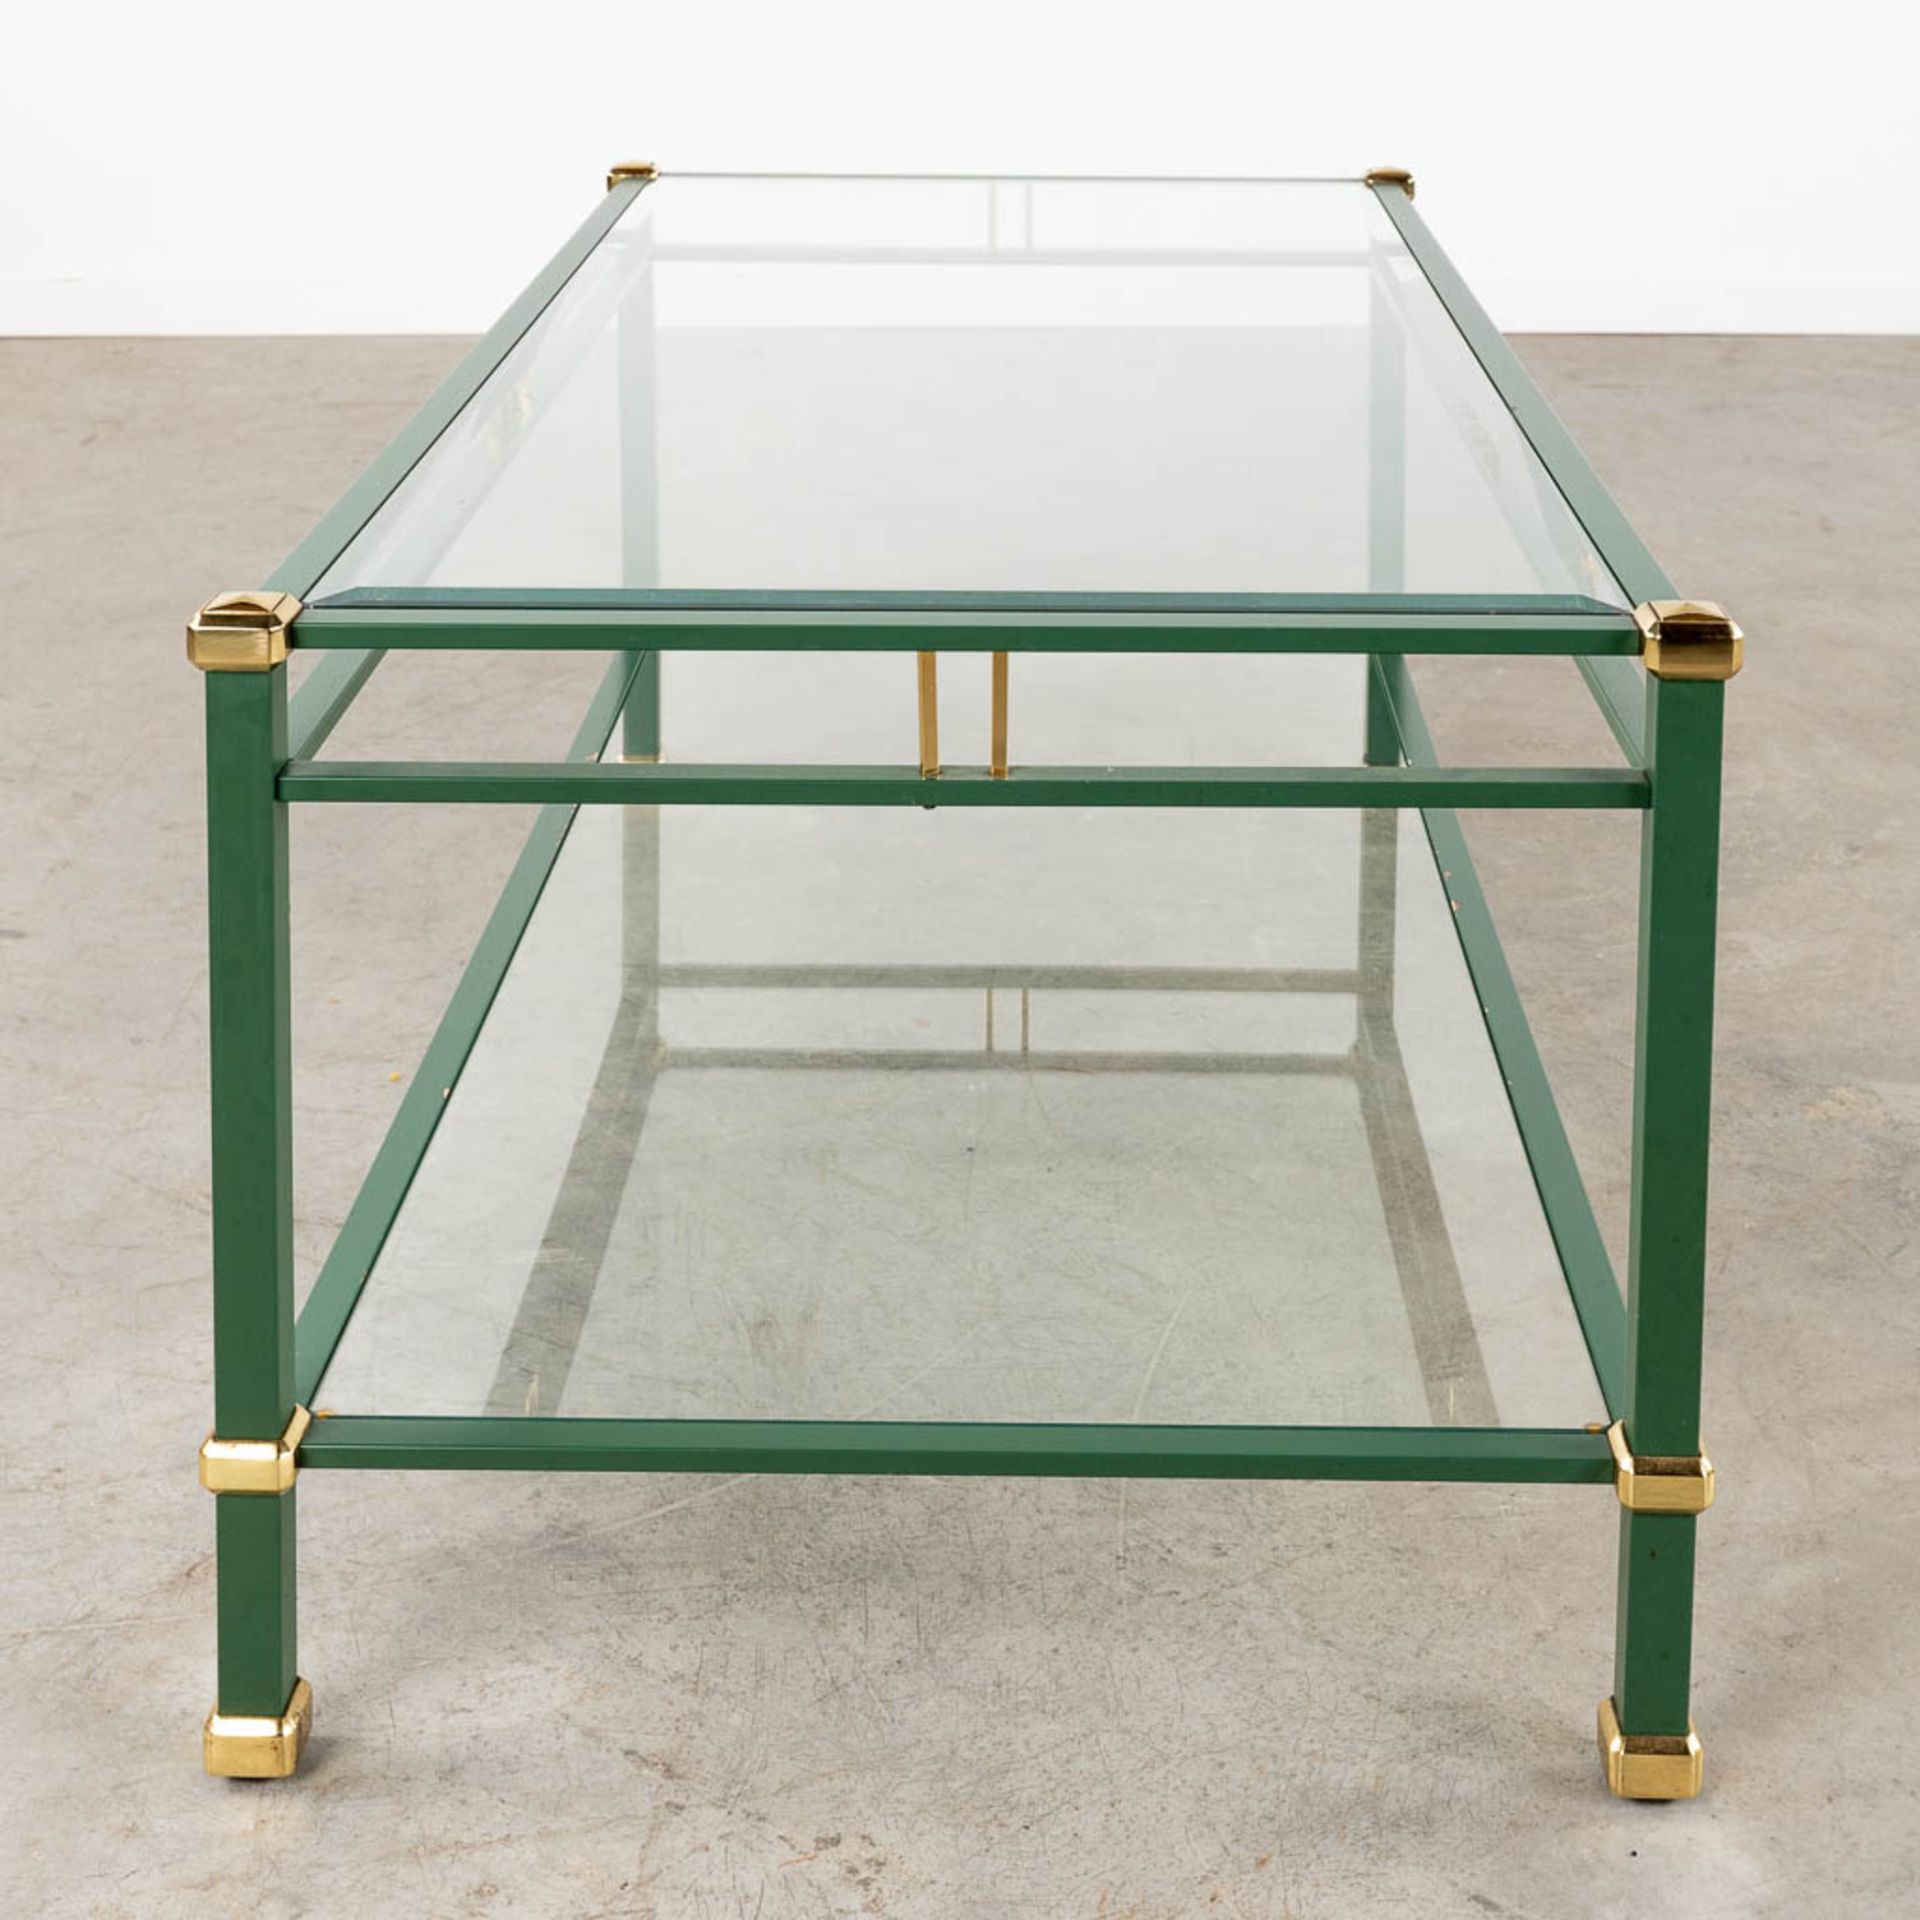 4 matching coffee and side tables, lacquered metal and glass, circa 1980. (L:58 x W:118 x H:46 cm) - Bild 4 aus 13